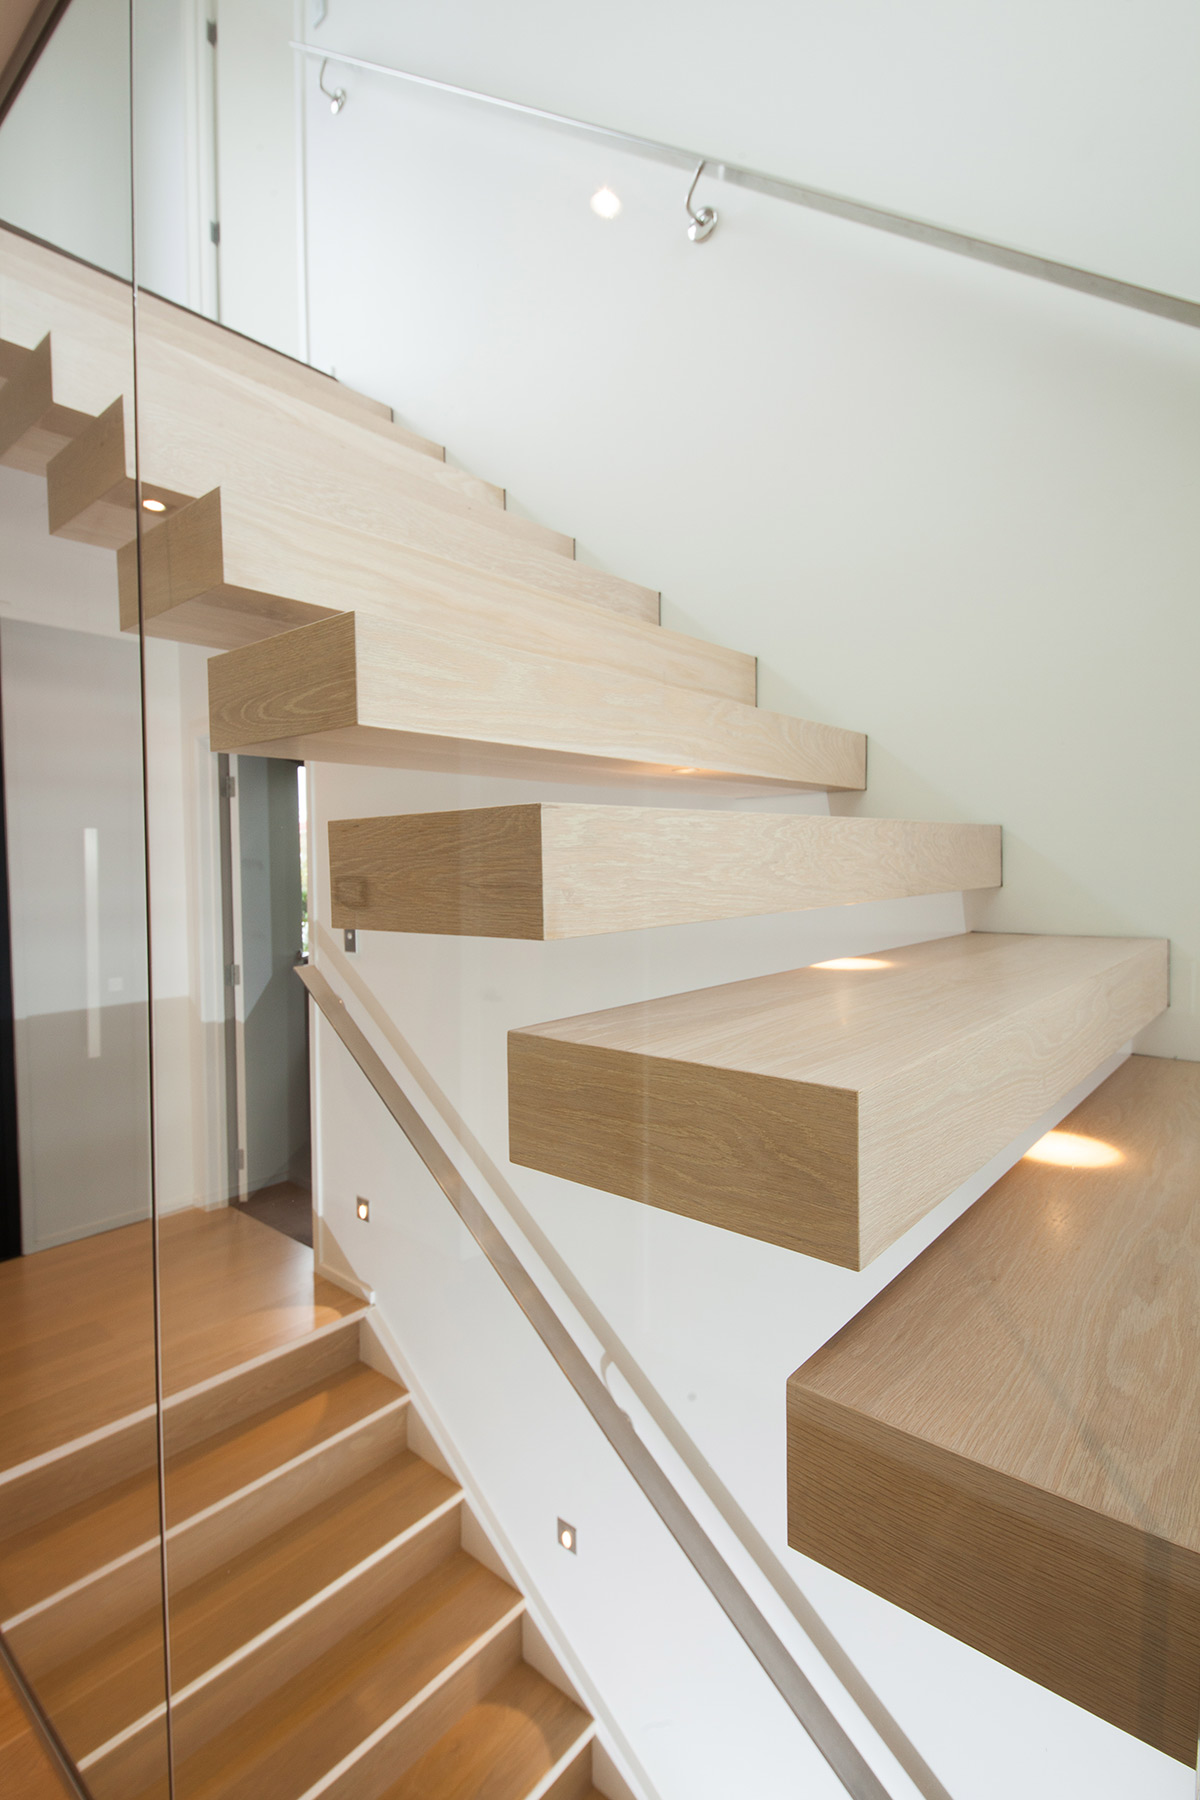 Staircase Design Ideas Gallery | Ackworth House